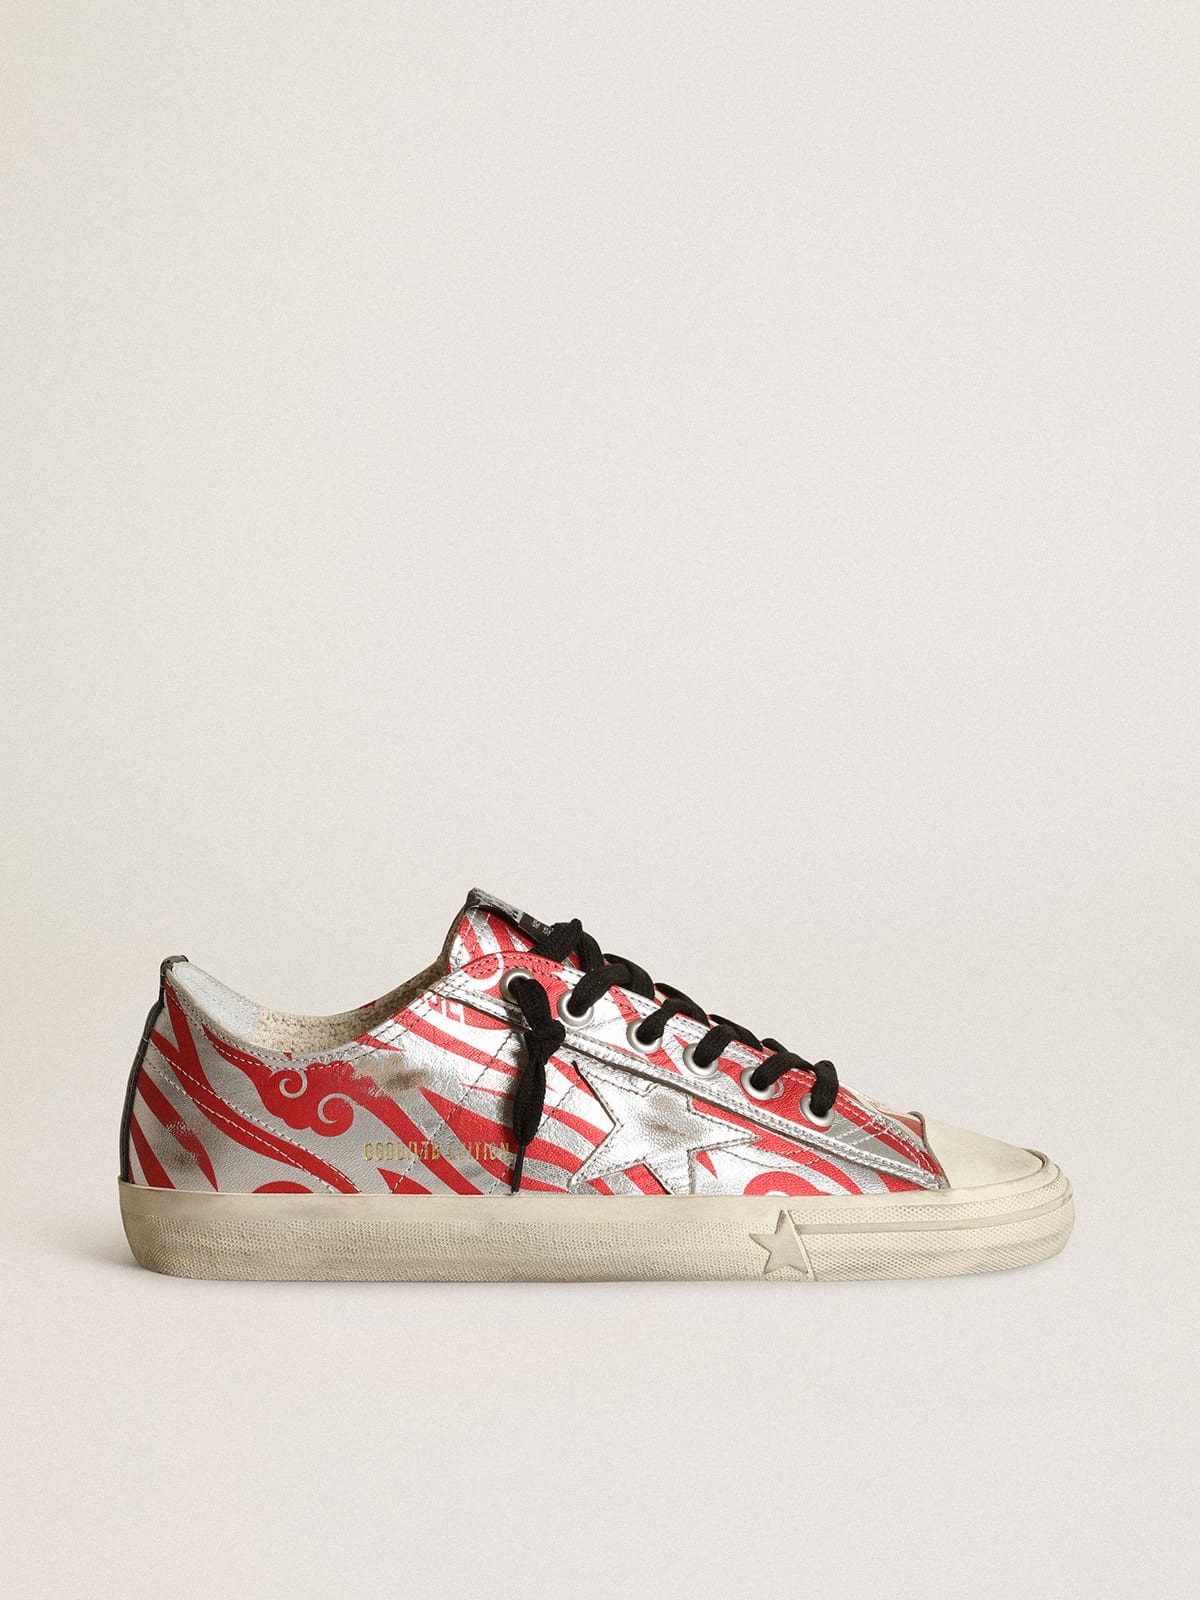 Golden Goose - V-Star LTD sneakers in silver and red laminated leather with tiger print in 